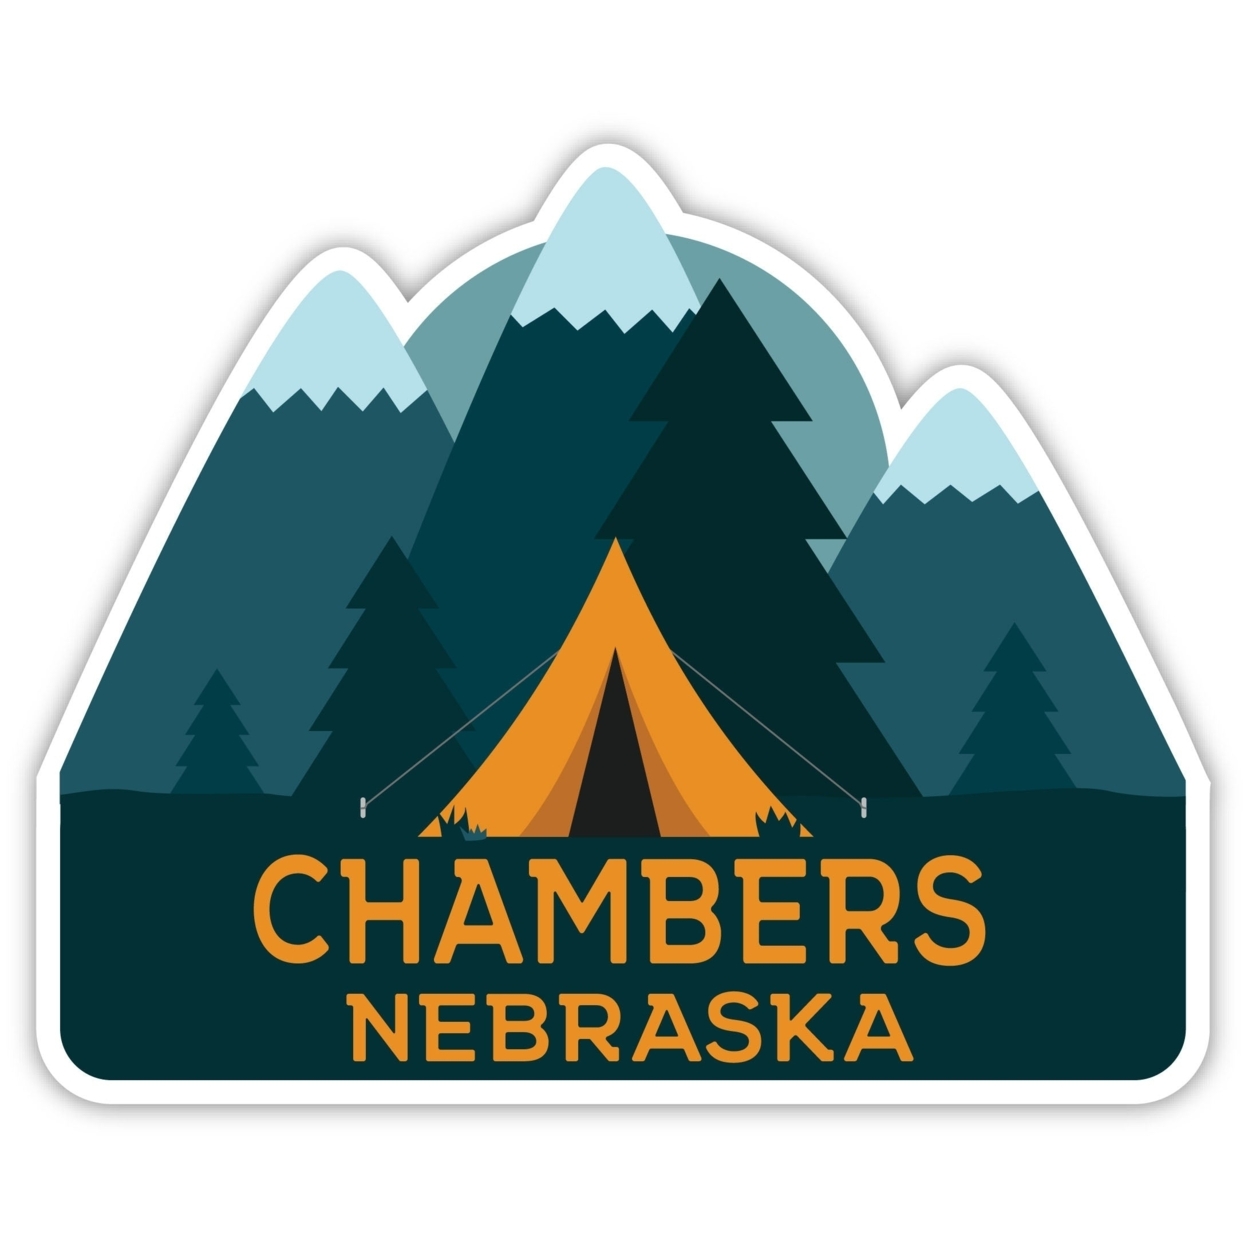 Chambers Nebraska Souvenir Decorative Stickers (Choose Theme And Size) - 4-Pack, 12-Inch, Tent